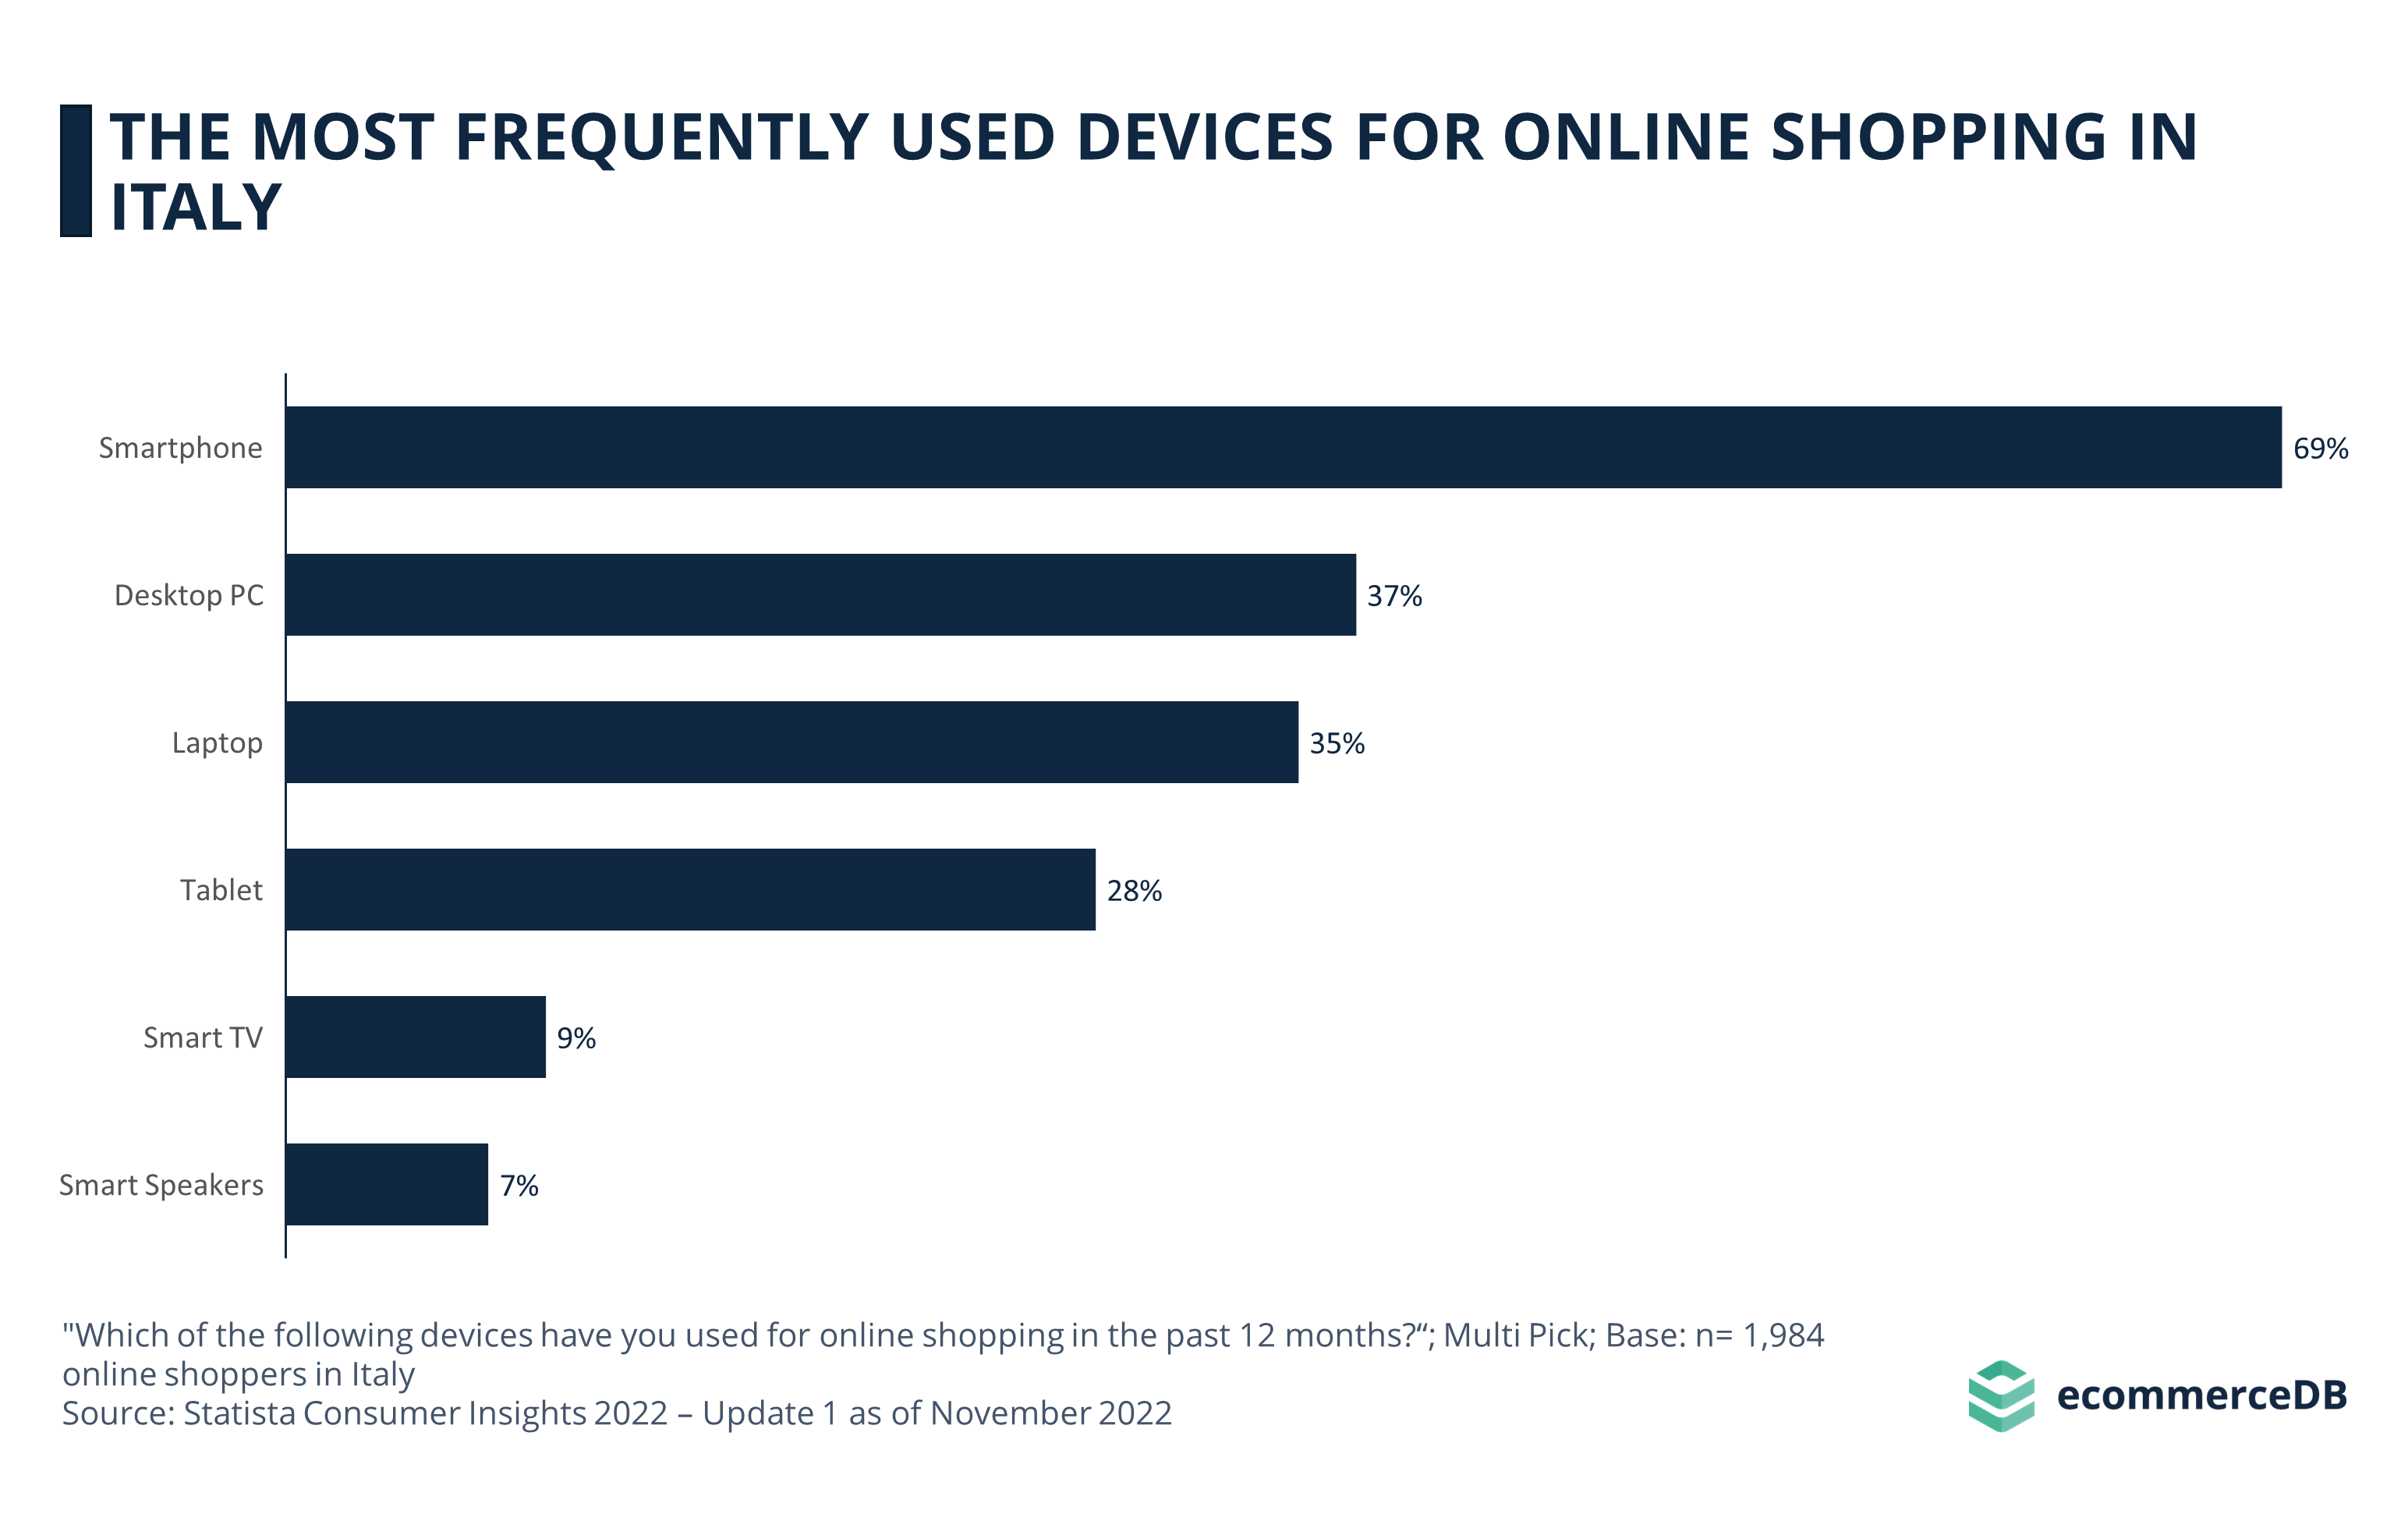 The Most Frequently Used Devices for Online Shopping in Italy